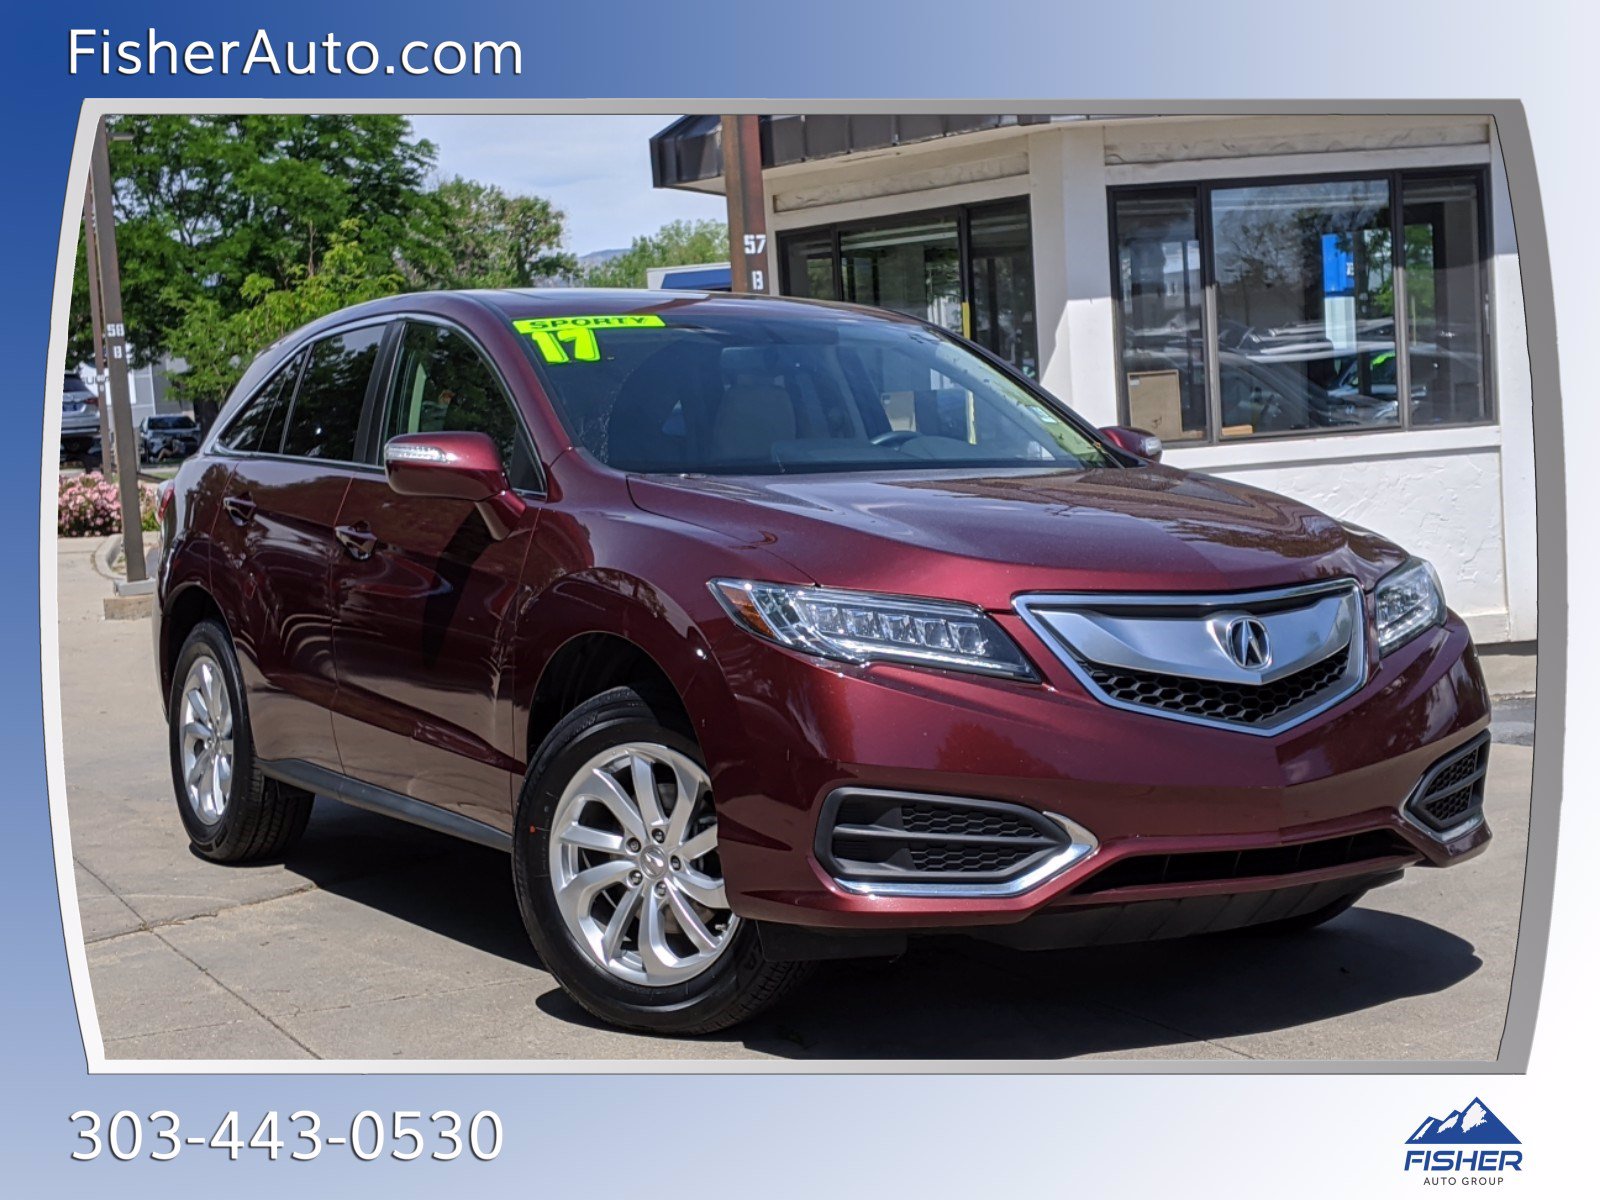 34 HQ Pictures Acura Rdx Sport For Sale : Used 2011 Acura RDX Tech Pkg For Sale ($17,999) | Atlanta ...